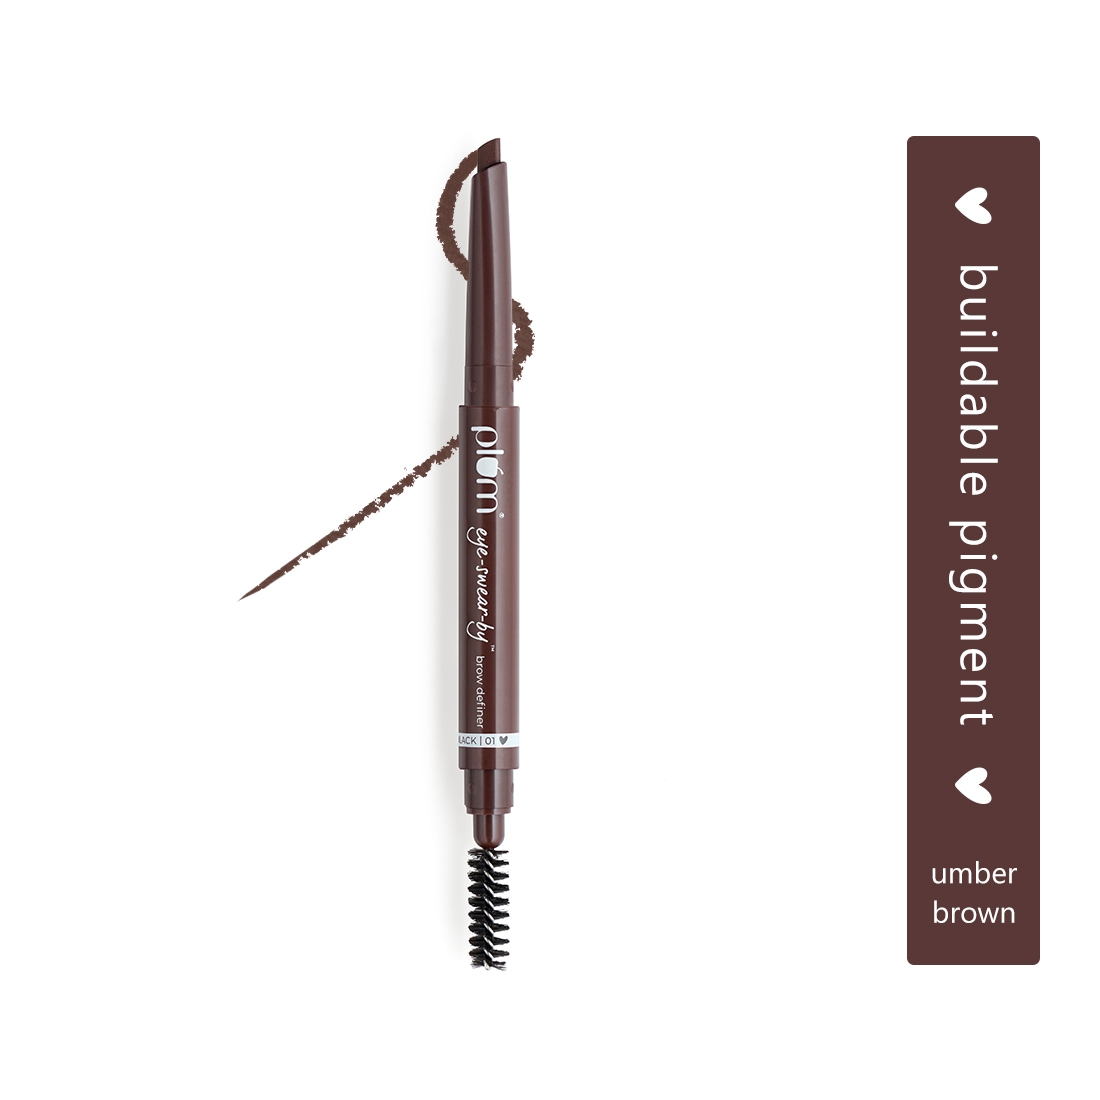 plum | Plum Eye-Swear-By Brow Definer - Umber Brown | Buildable Pigment | With Vitamin E | 100% Vegan & Cruelty Free